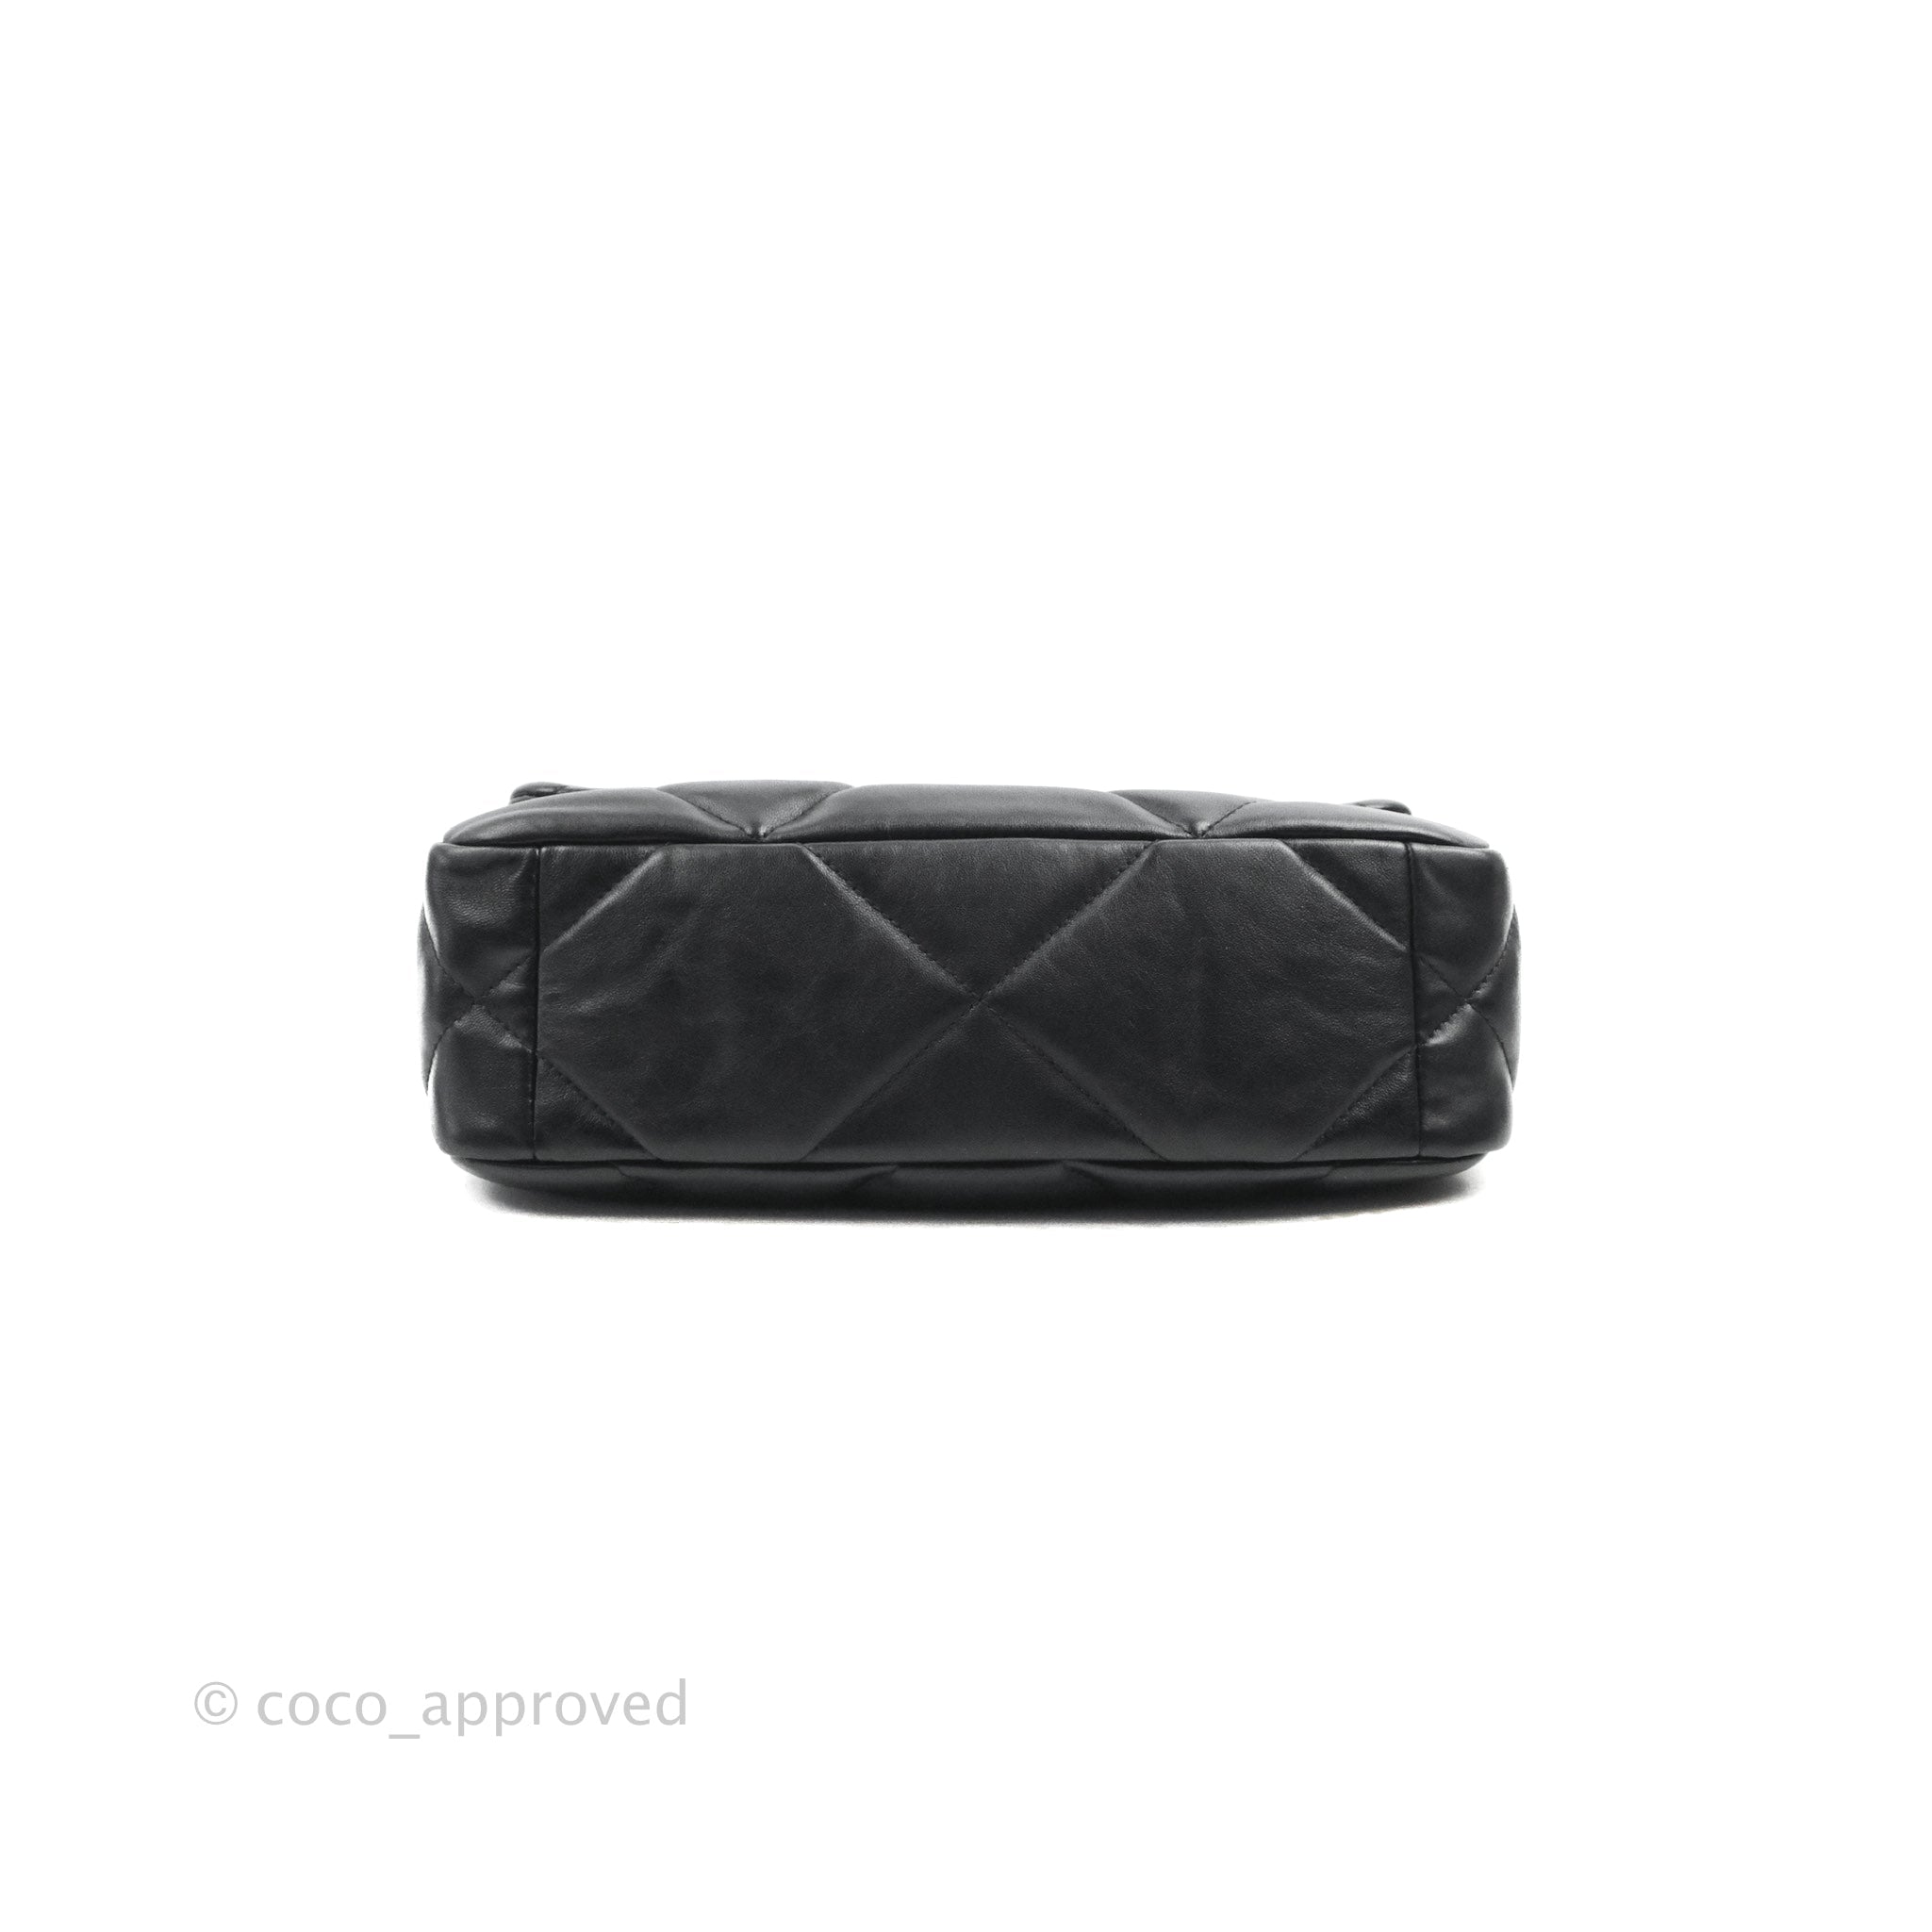 Sold at Auction: Chanel - a small bowling bag in black velour